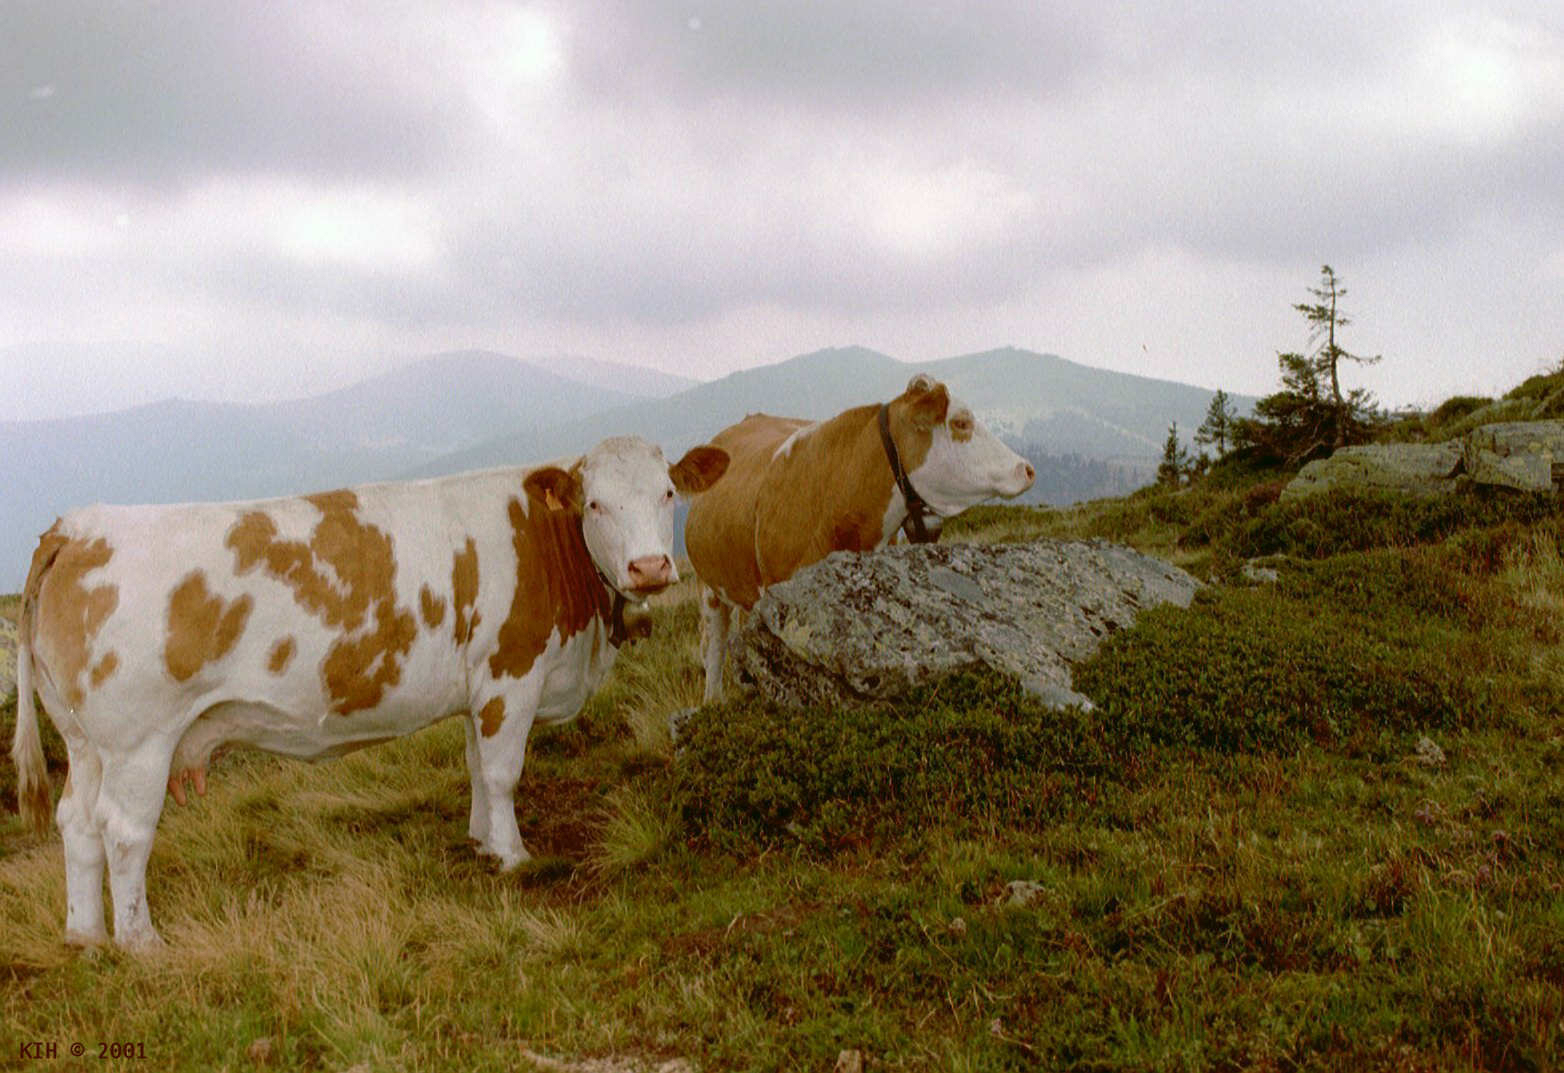 Two Cows on Hill [AT 2001]   KIH